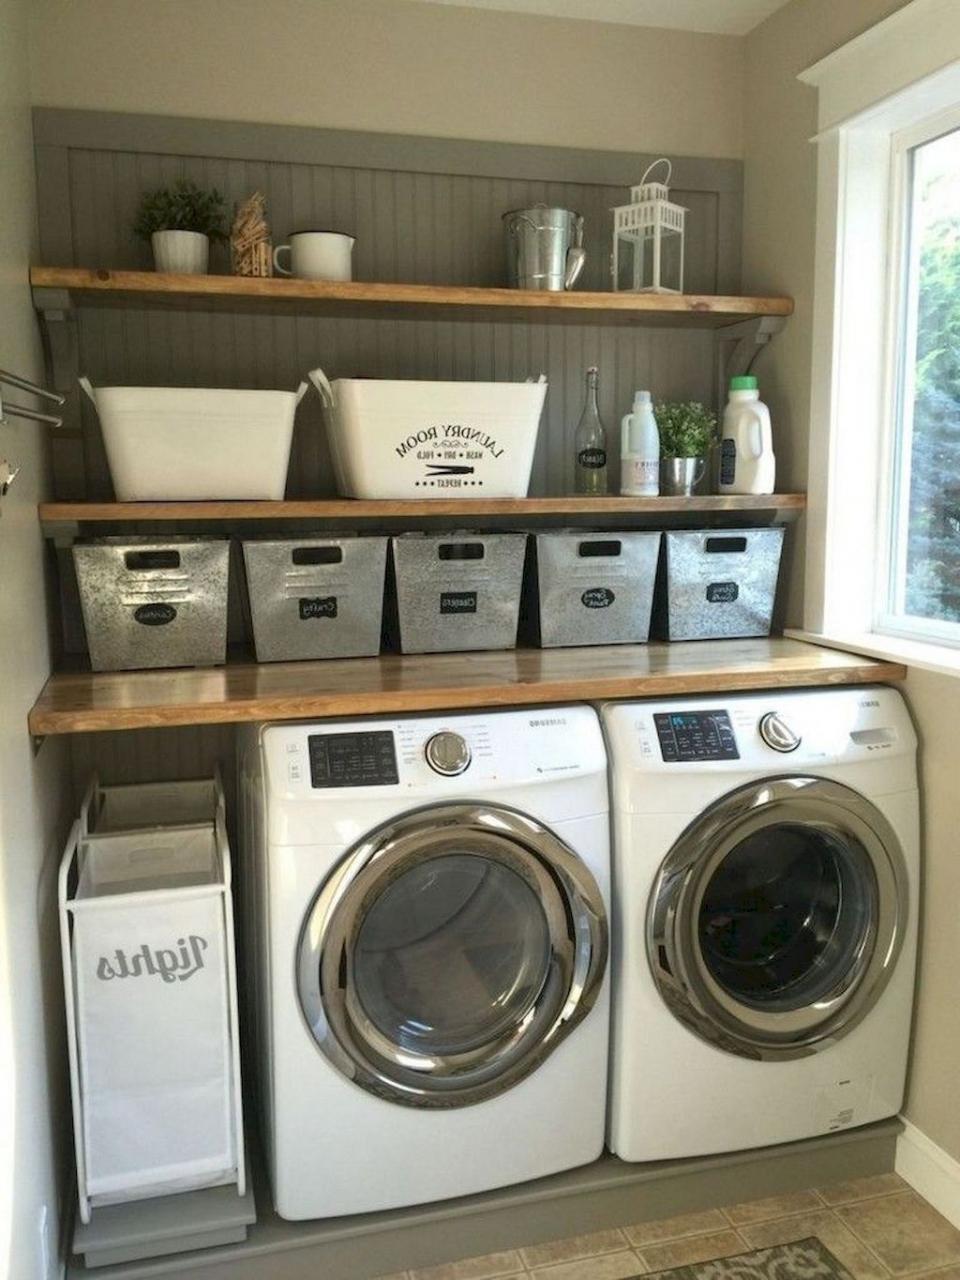 20+ Cute Laundry Room Storage Shelves Ideas To Consider Laundry room